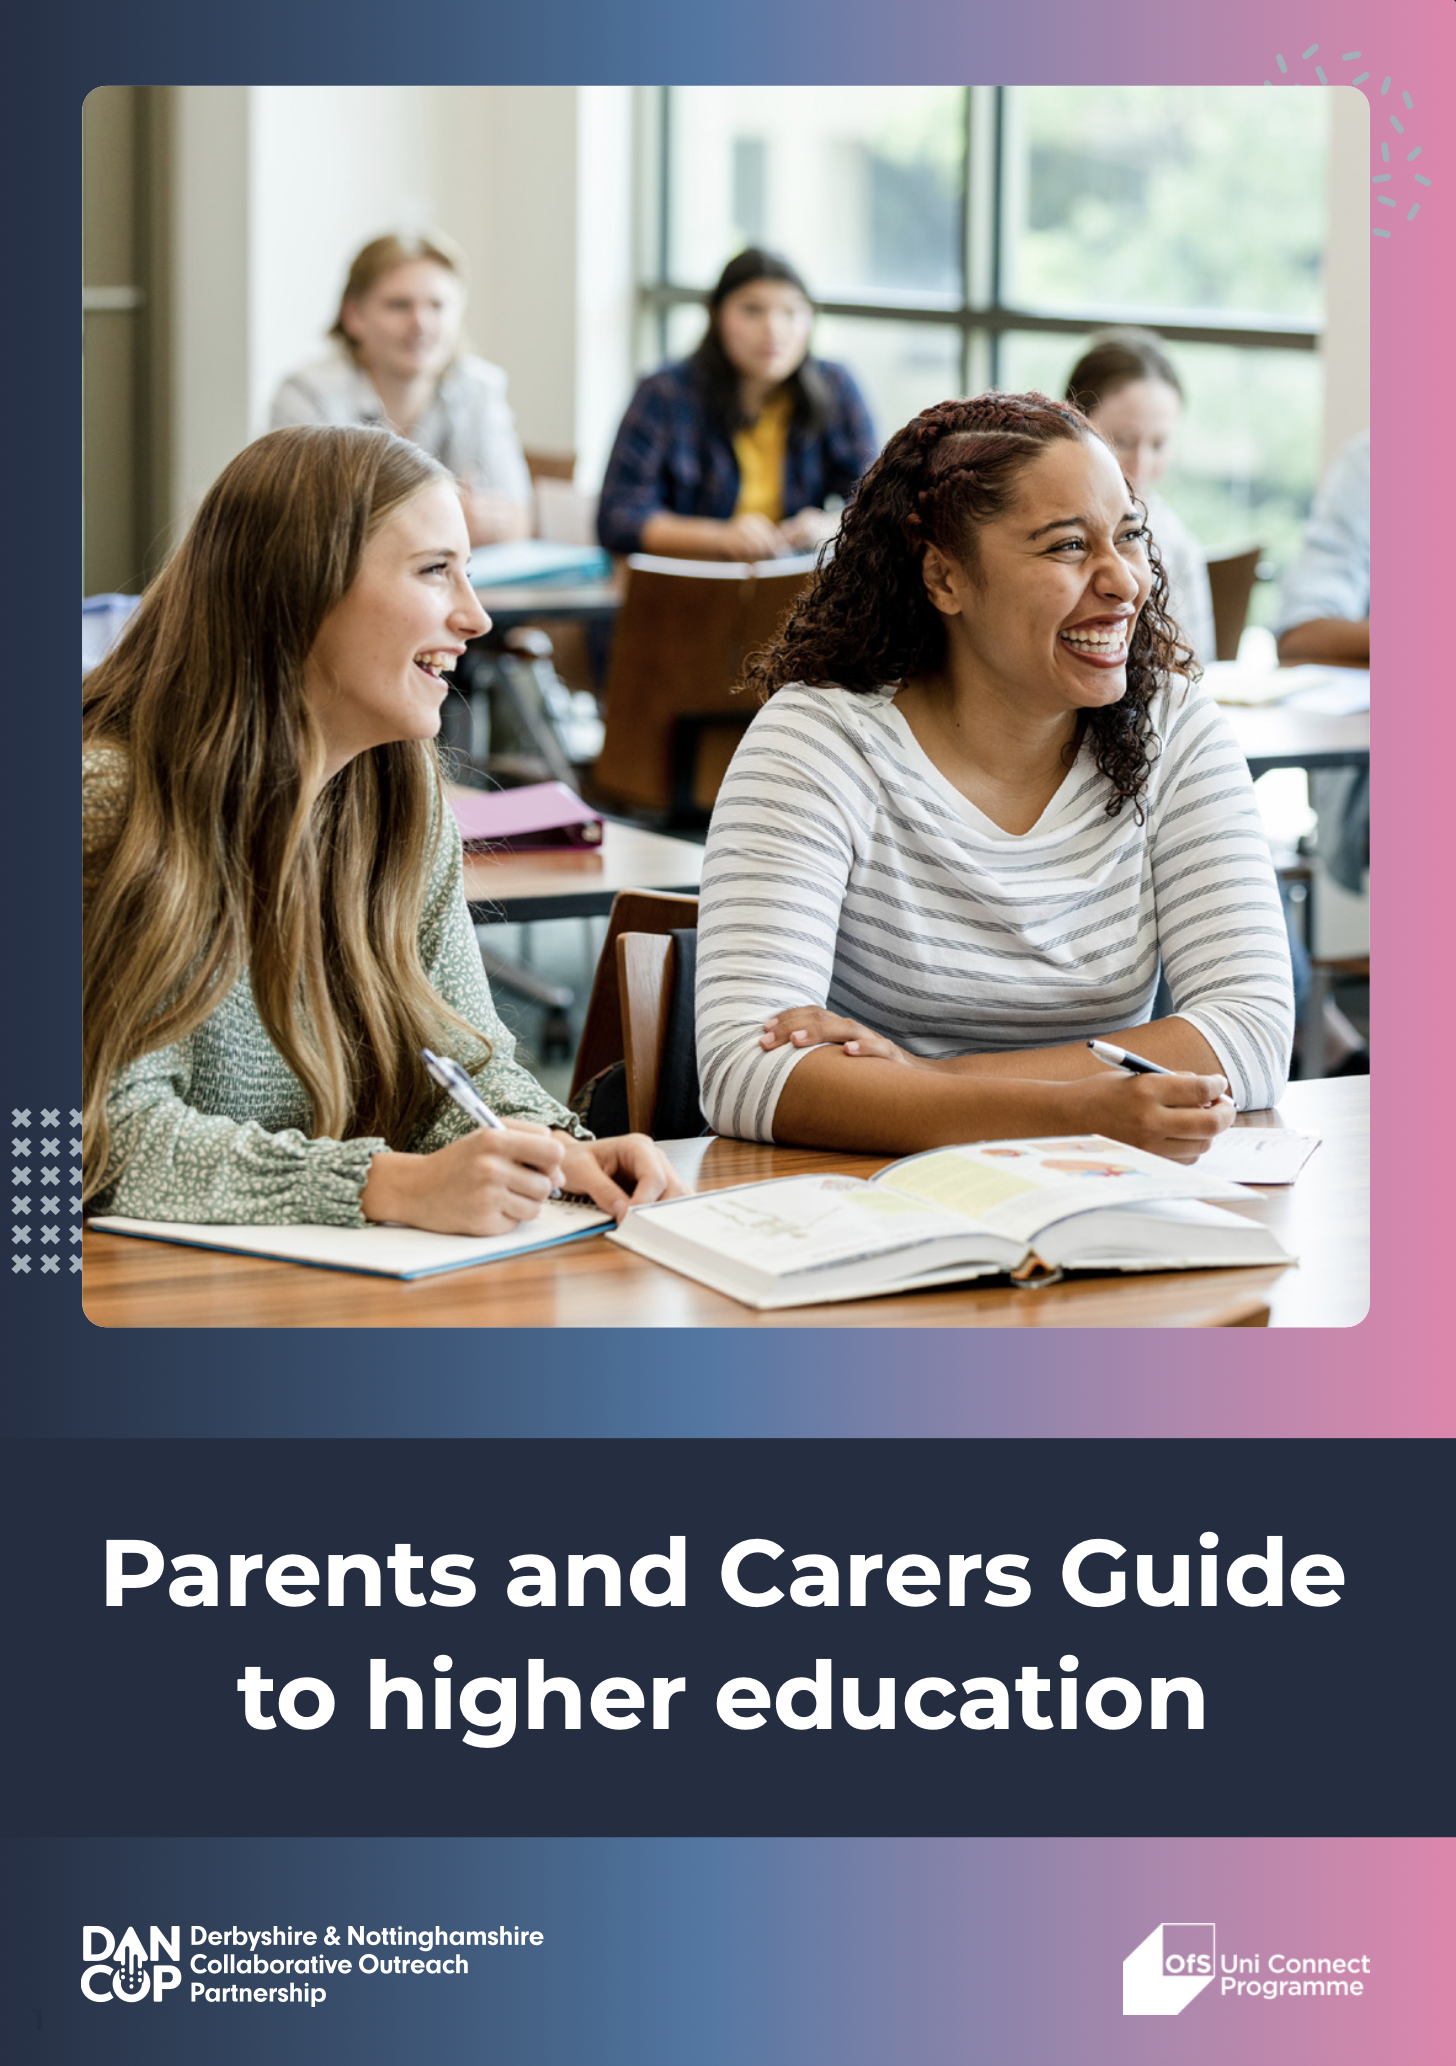 Parents and Carers Guide to Higher Education (Long Version)